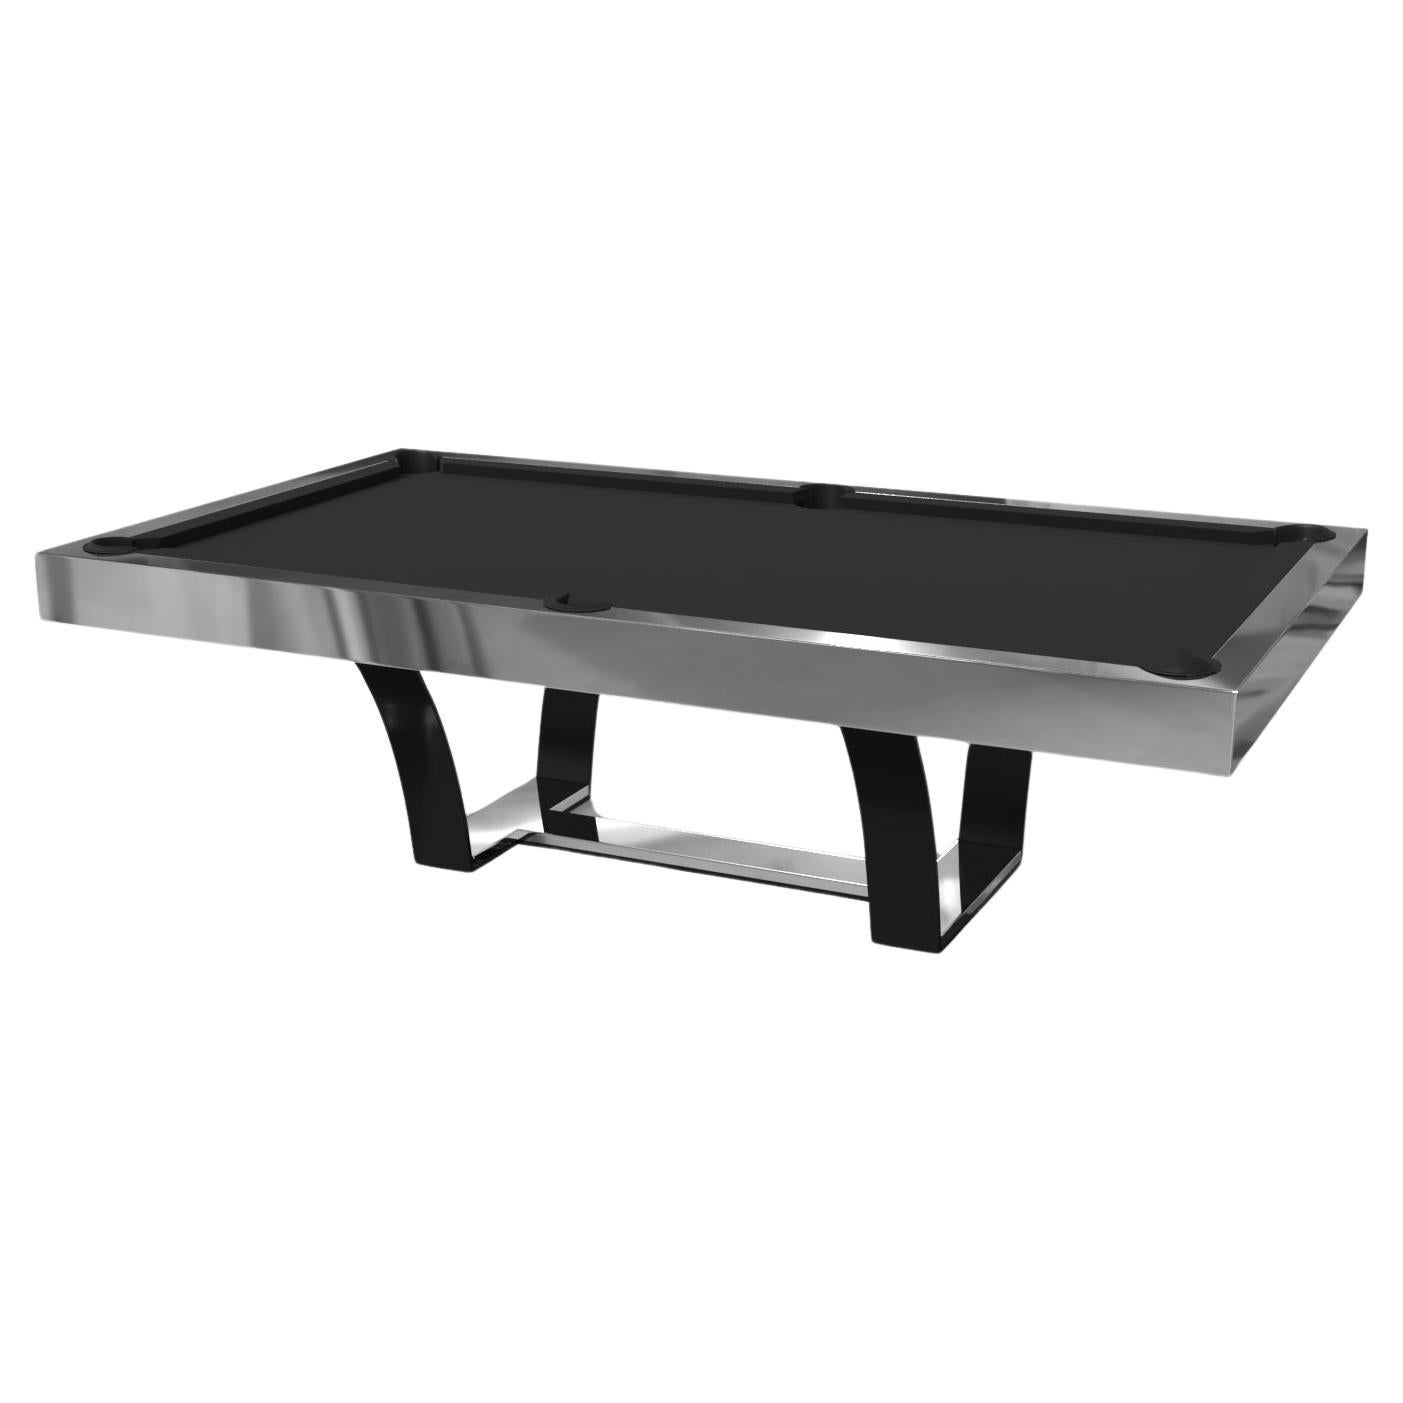 Elevate Customs Elite Pool Table / Solid Stainless Steel in 7'/8' - Made in USA